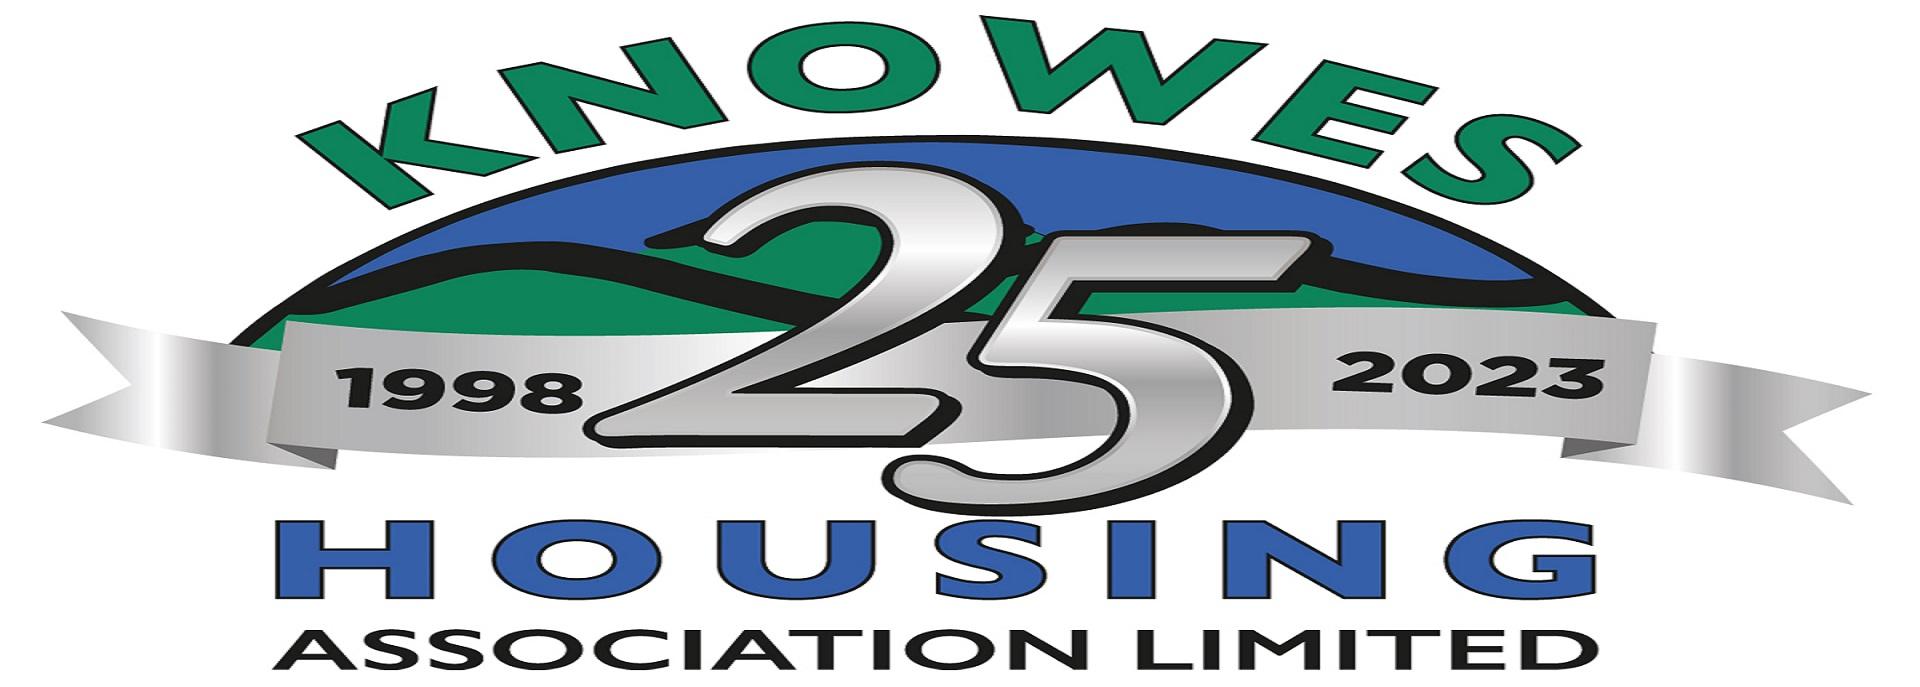 Knowes Housing Association Celebrates 25 years during 2023